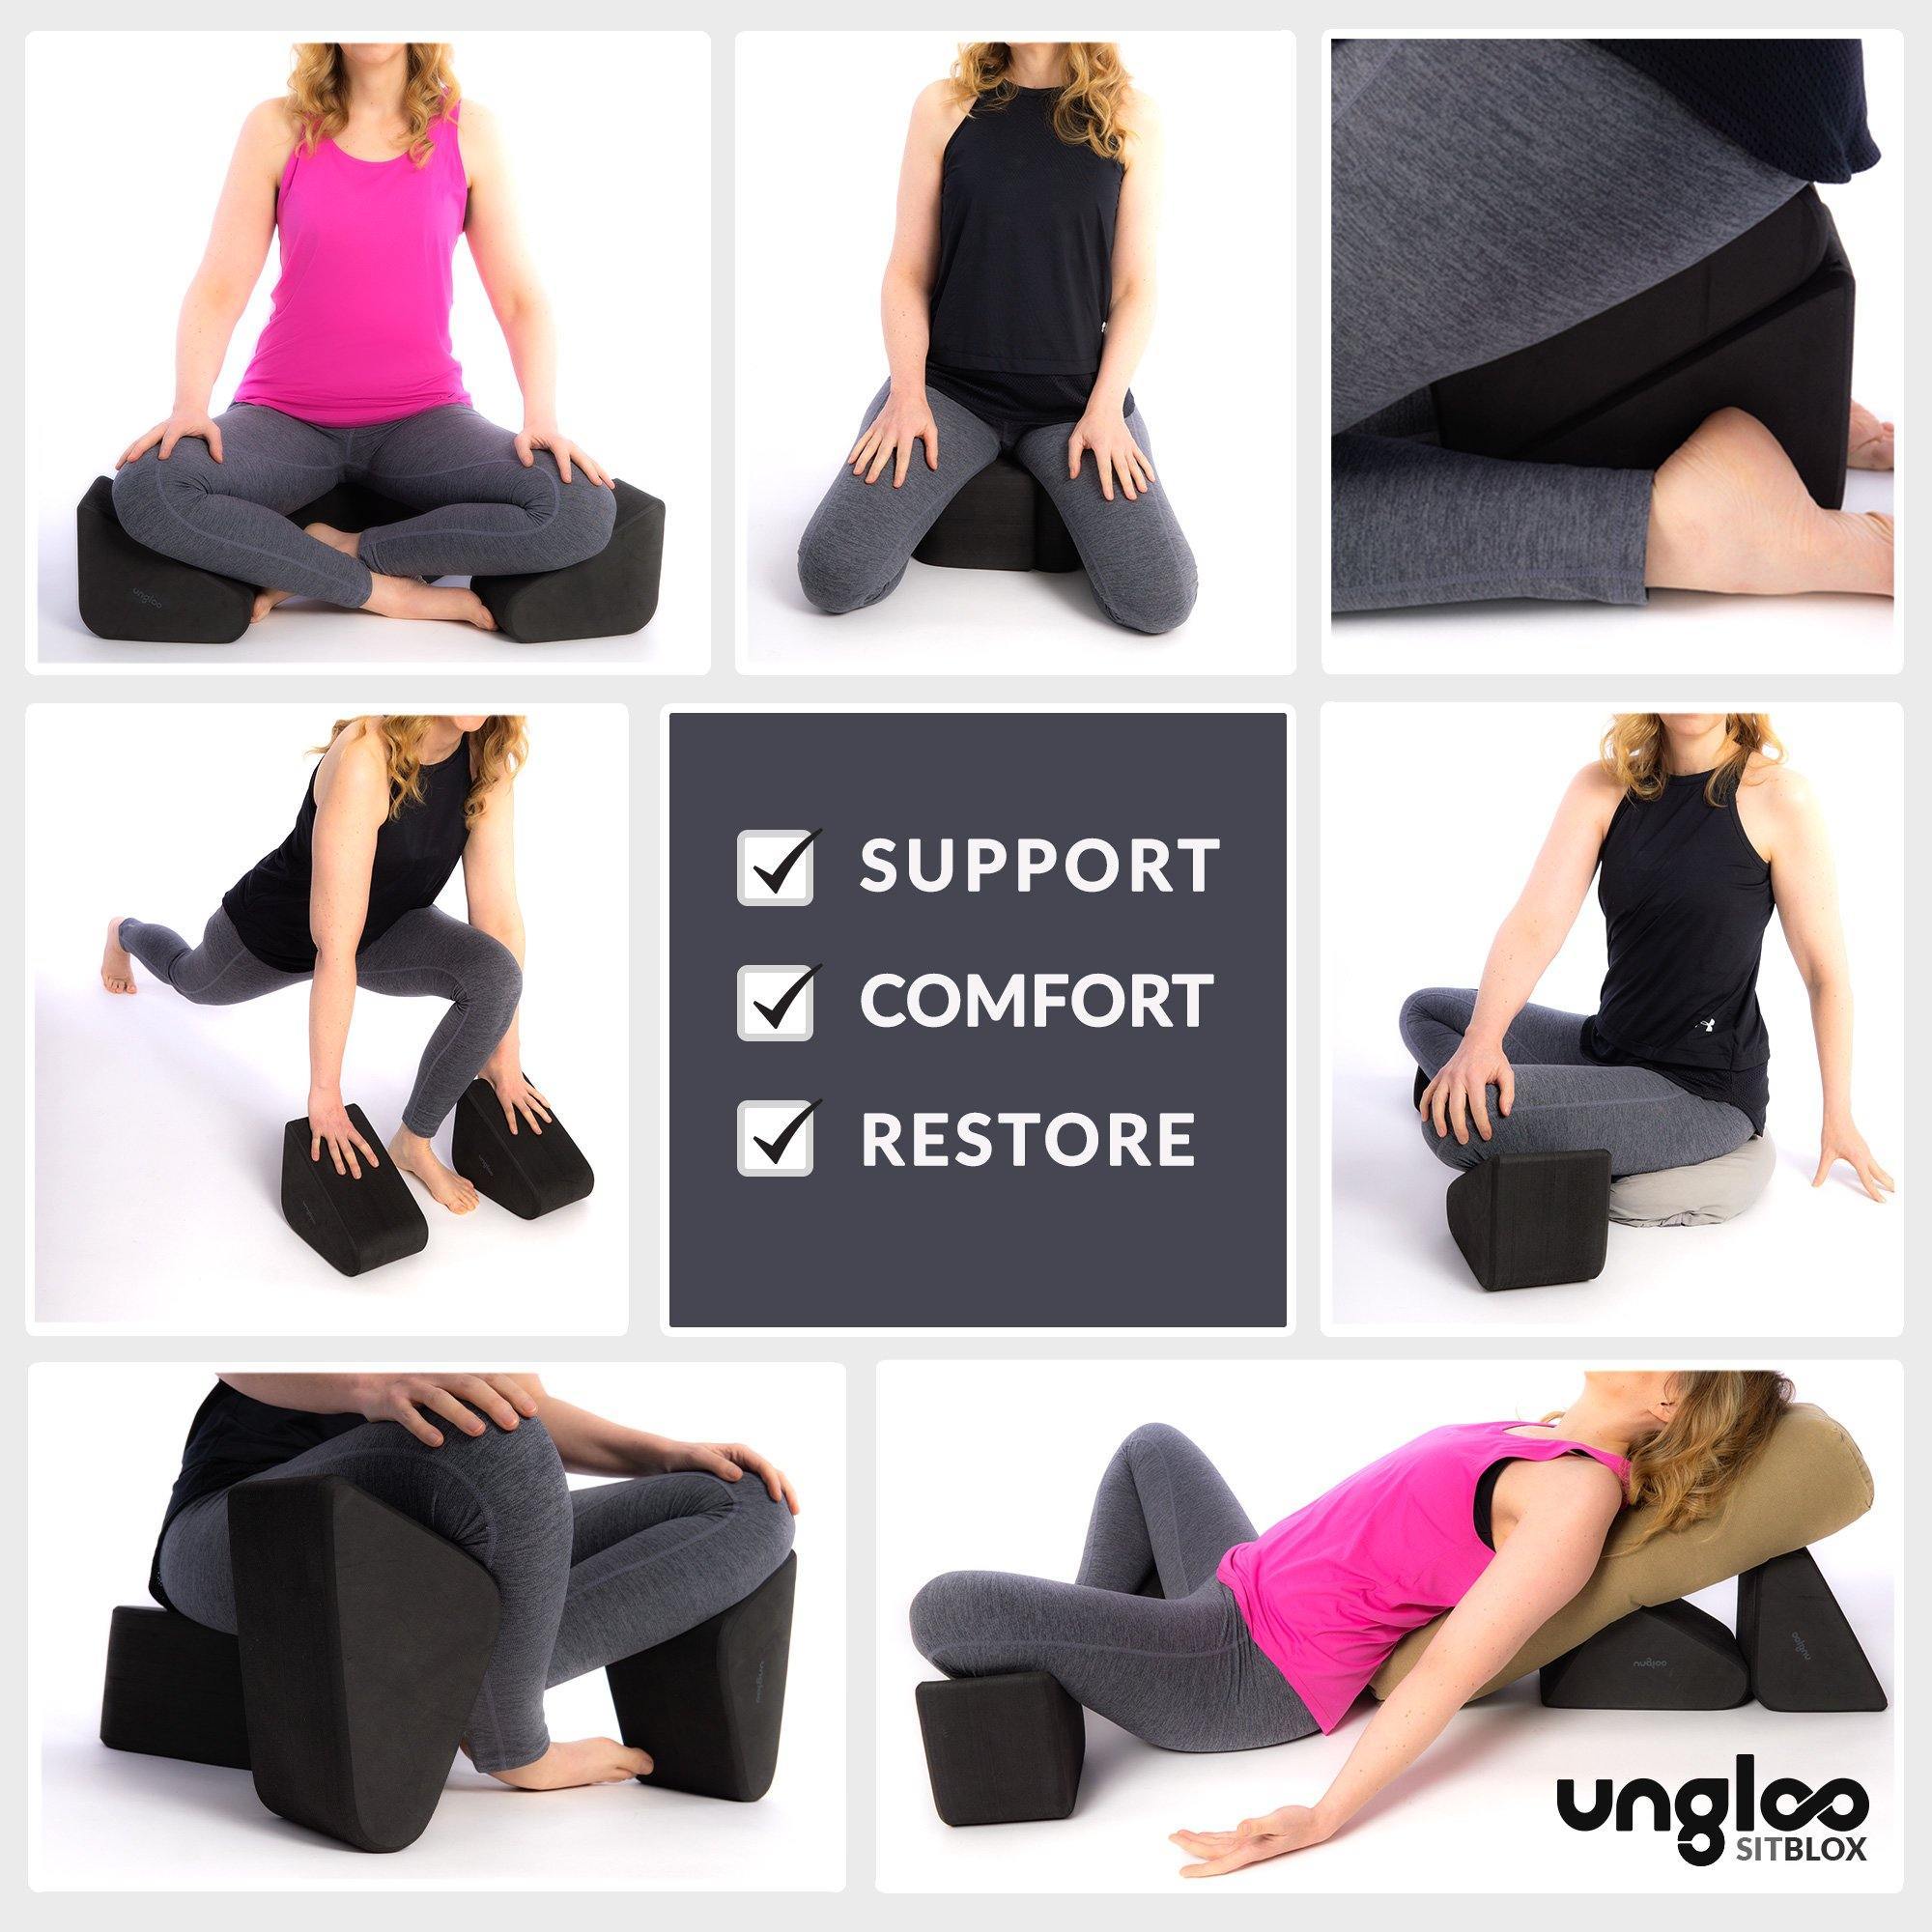 Image showing how versatile the sitblox product us.  It can be used as meditation blocks, stretching, comfort and more.